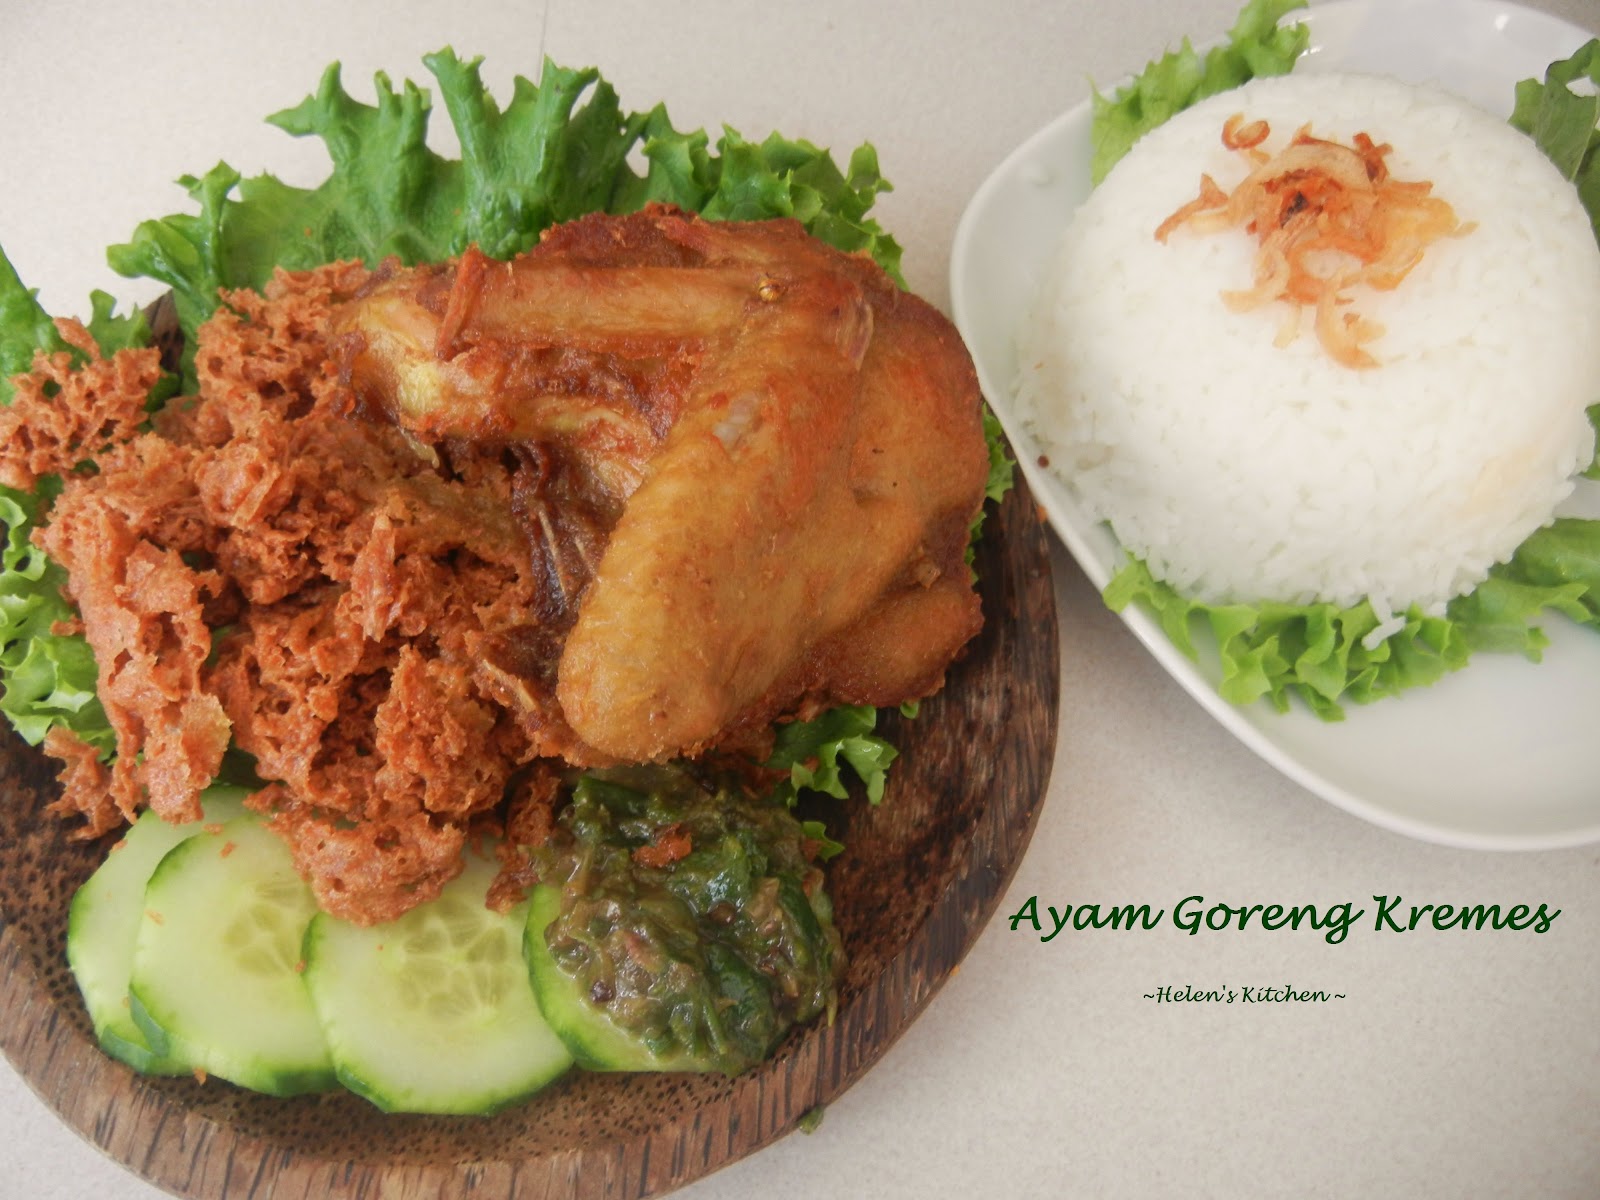 Helen's Kitchen: Ayam Goreng Kremes or Fried Chicken with 